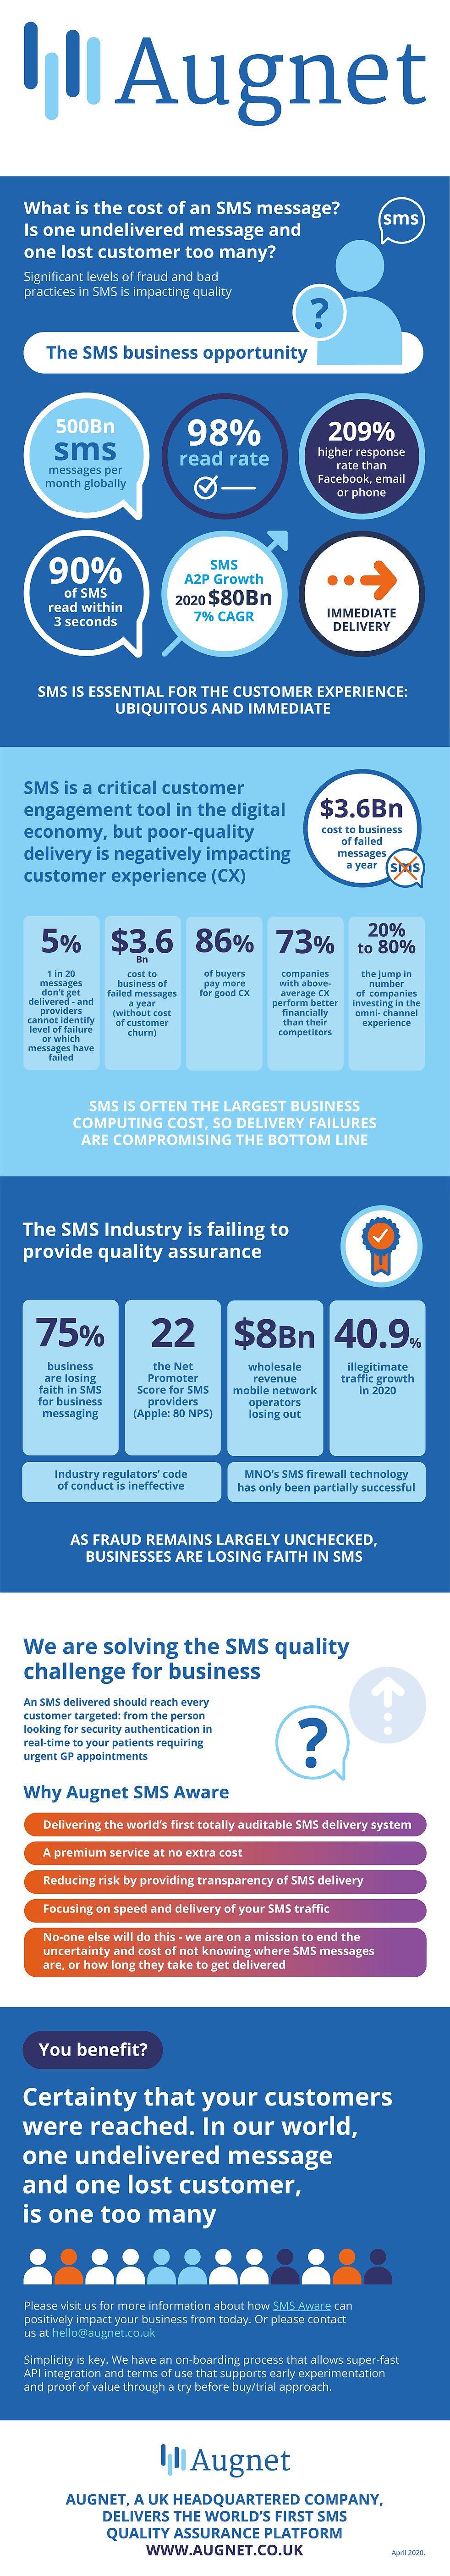 cost-of-an-undelivered-SMS-message-infographic-plaza